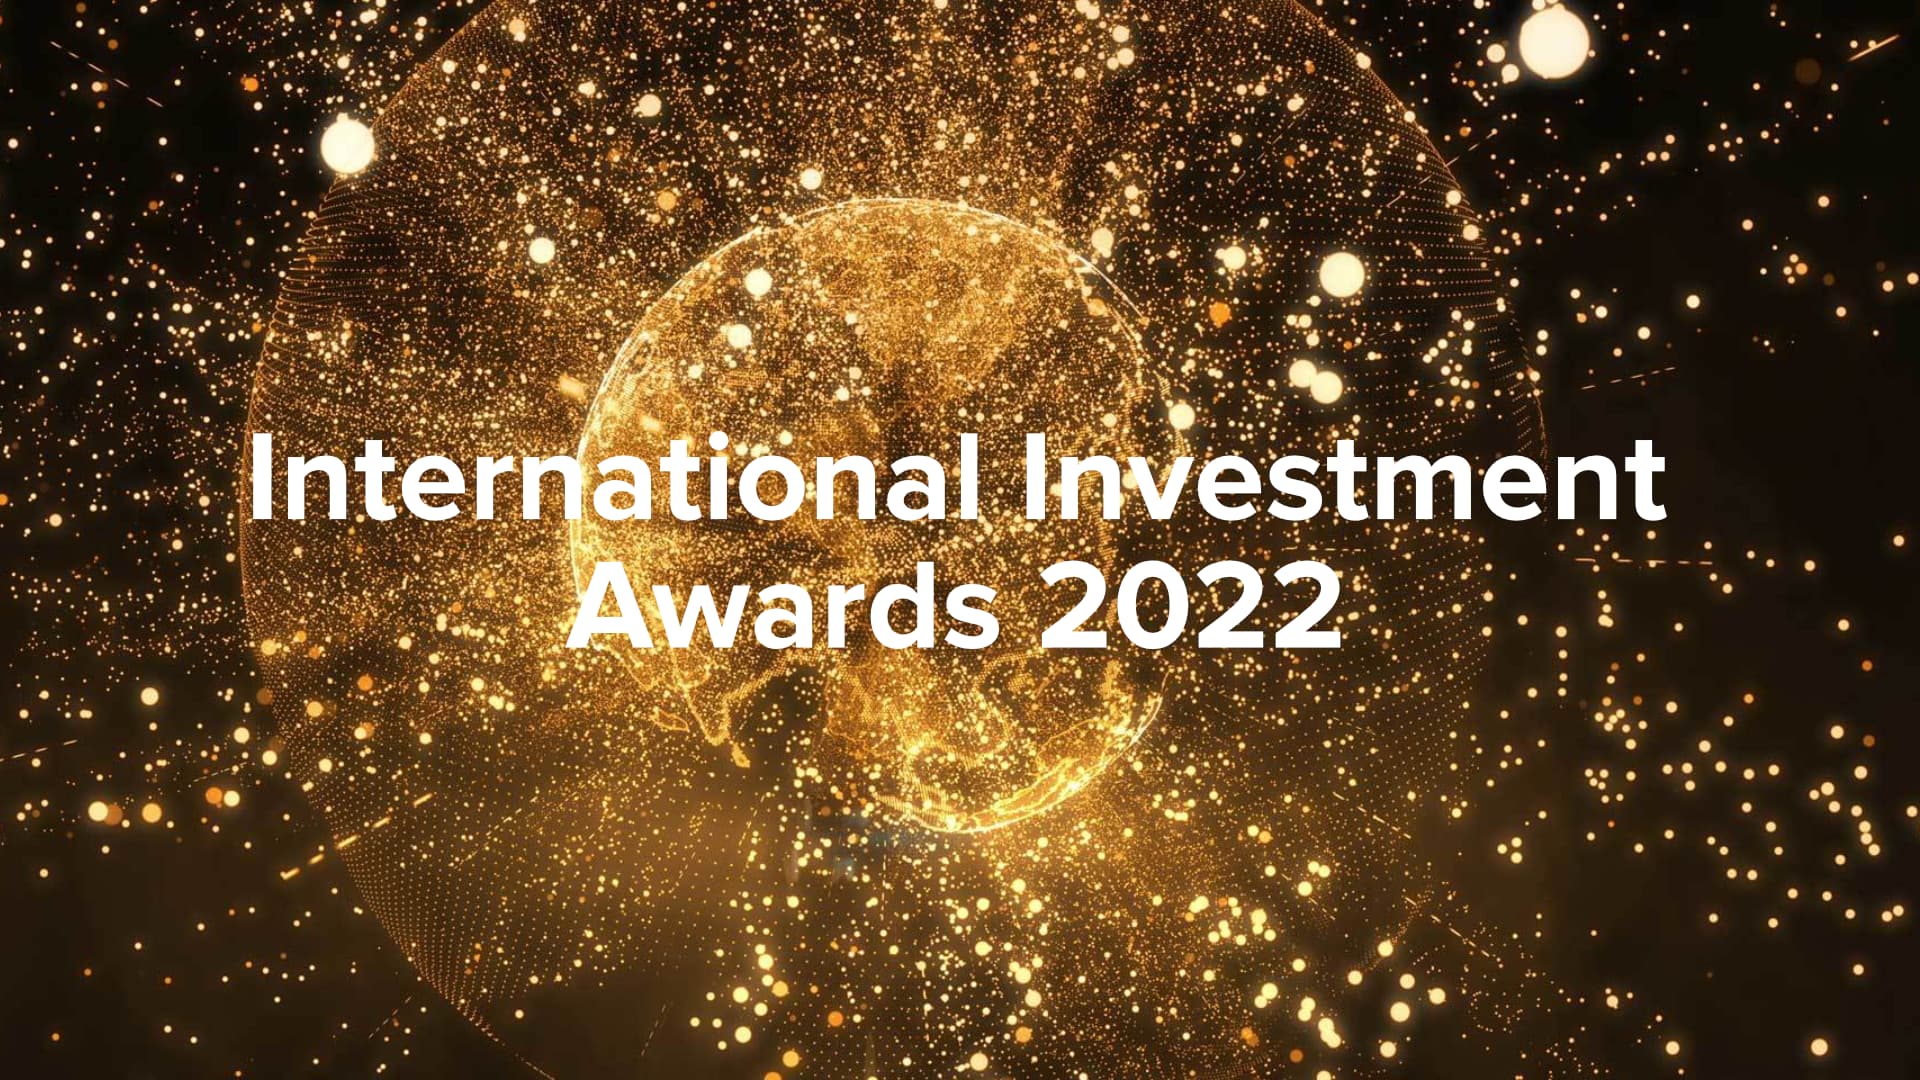 Holborn wins 8 awards in II Investment Award 2022